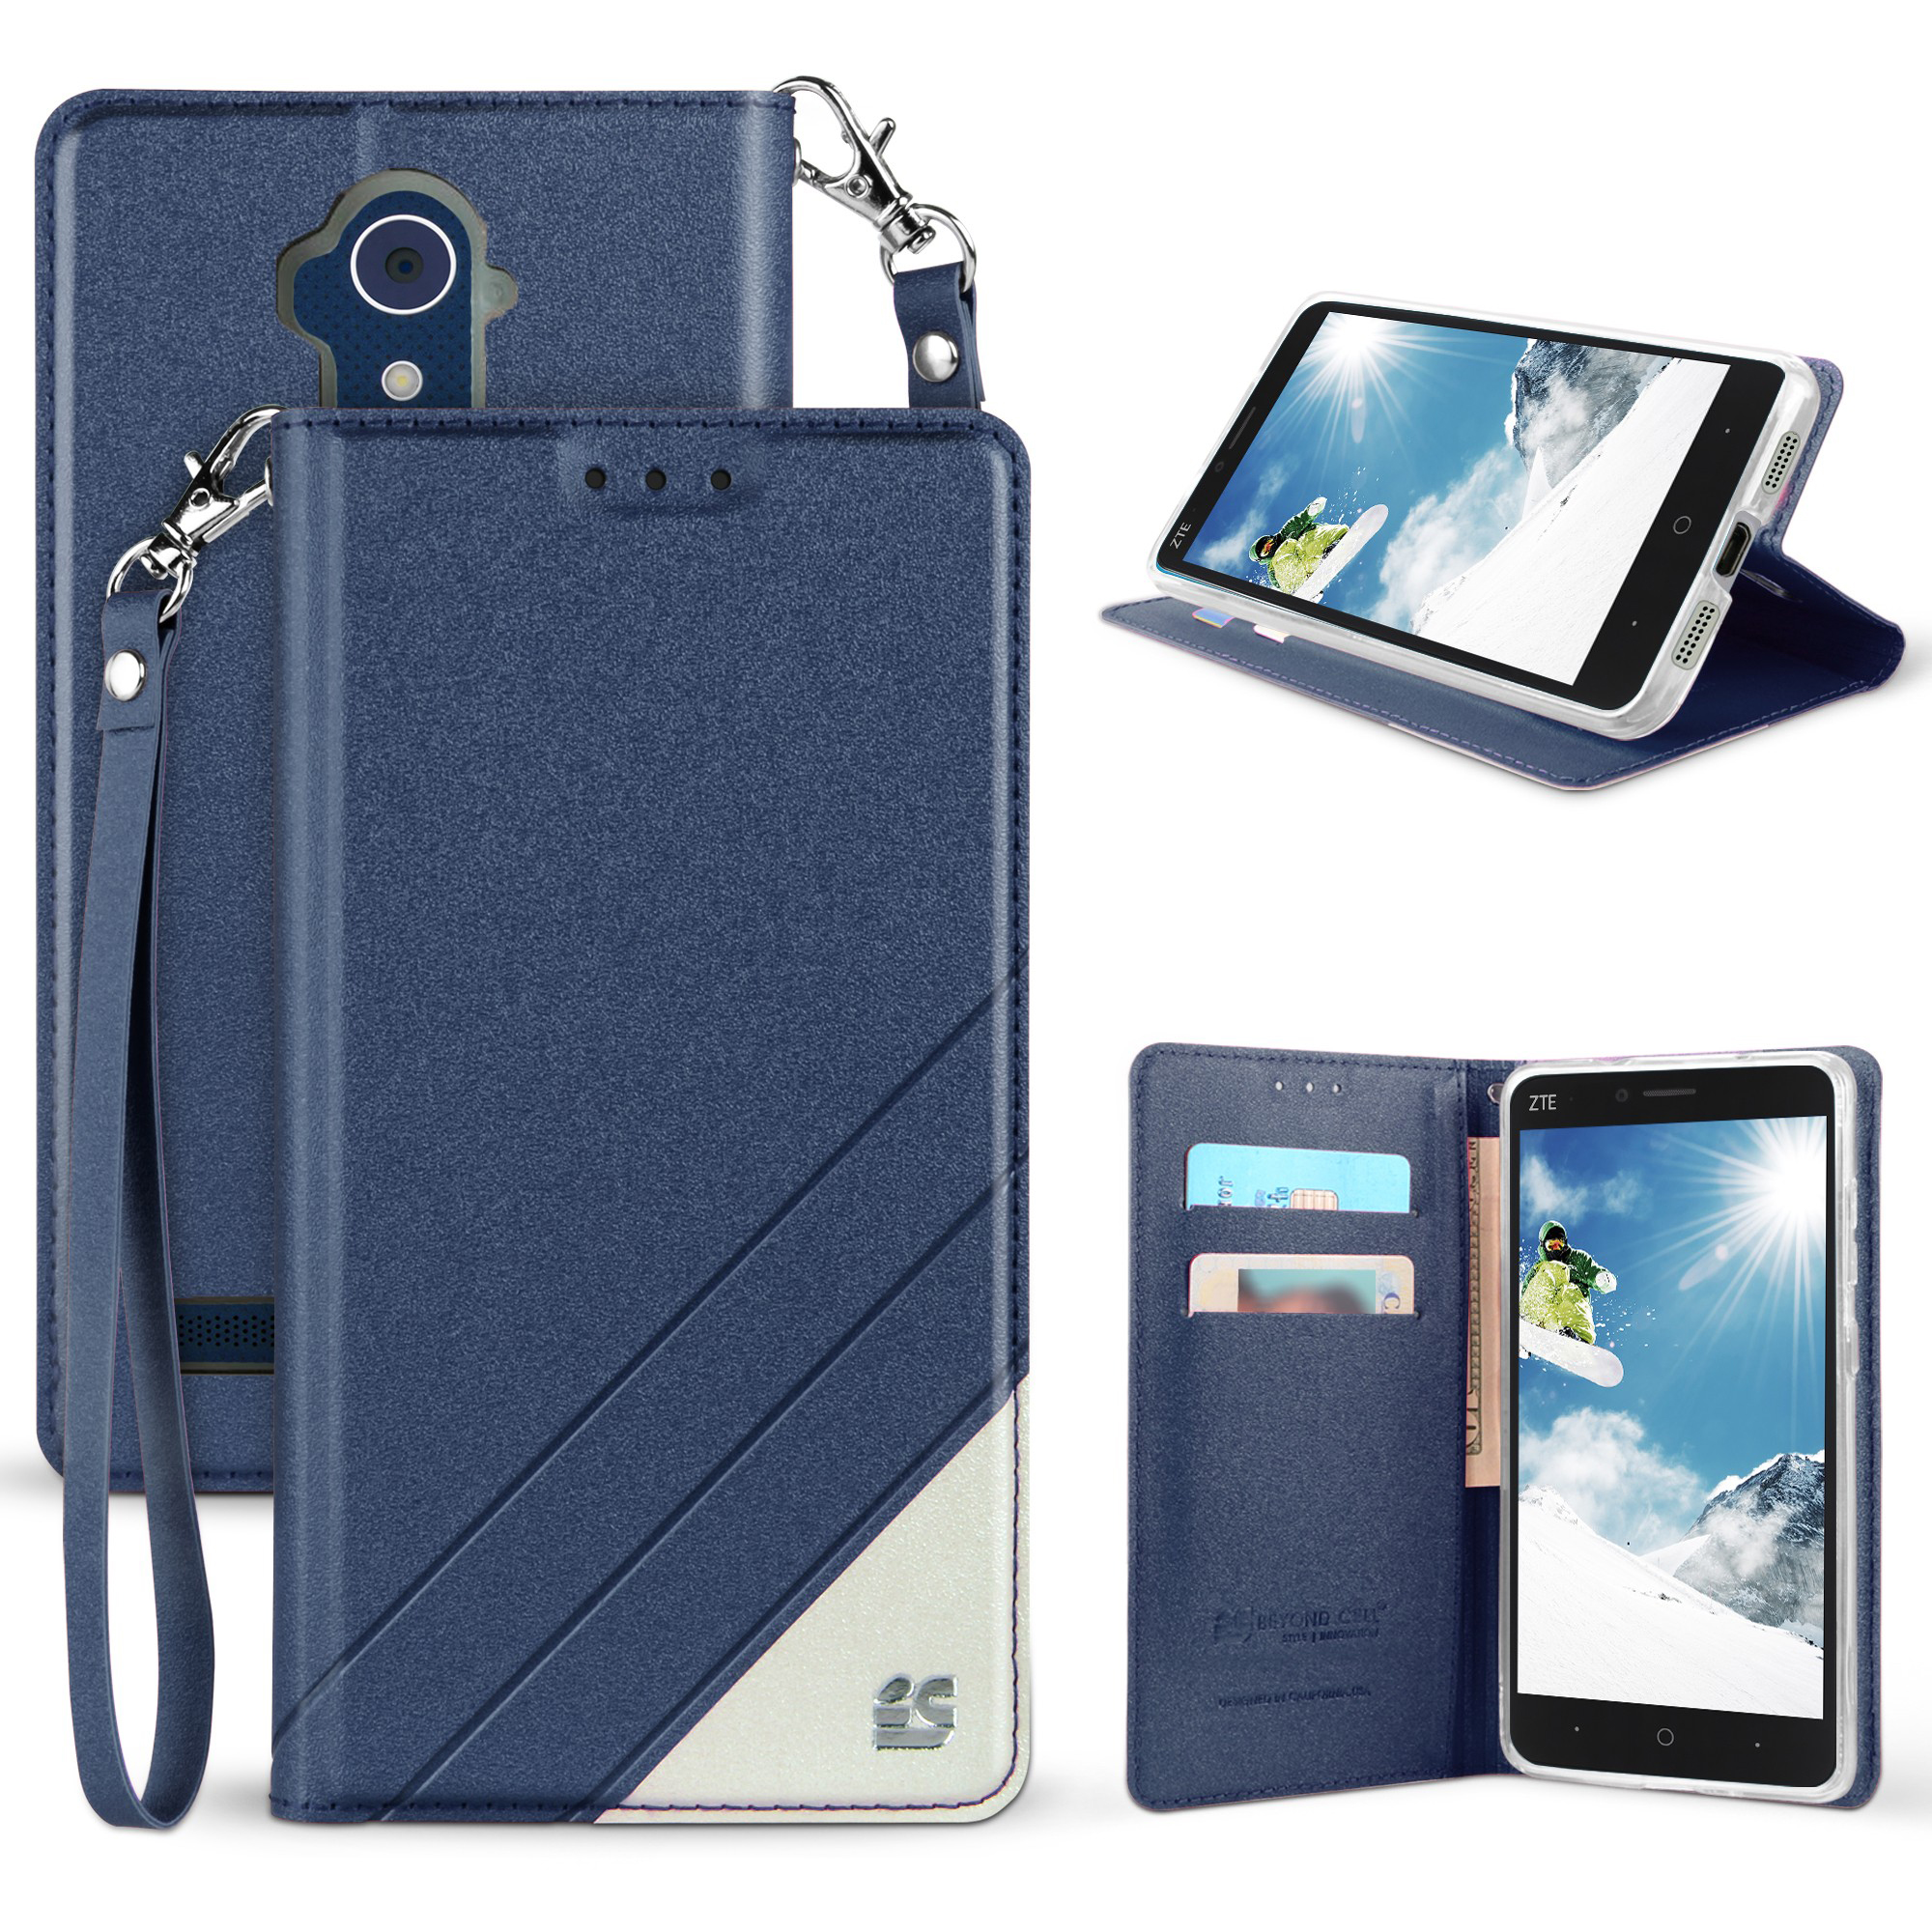 Beyond Cell WALLET CREDIT CARD SLOT CASE + WRIST STRAP FOR ZTE BLADE X MAX, BLADE MAX 3